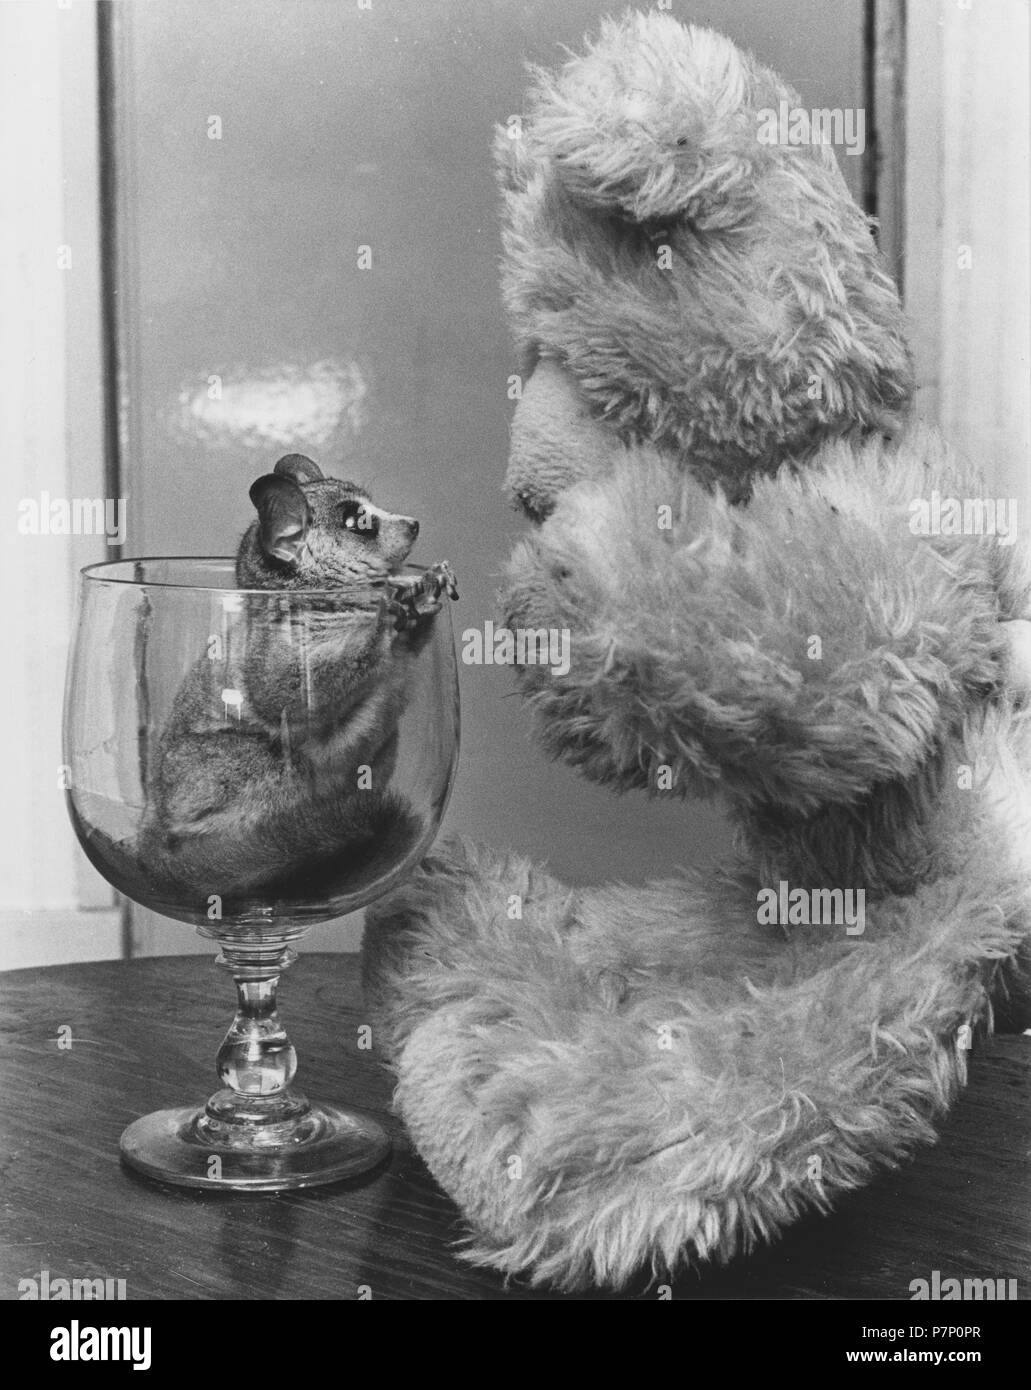 Rodent sits in a glass and looks at a stuffed animal, England, Great Britain Stock Photo